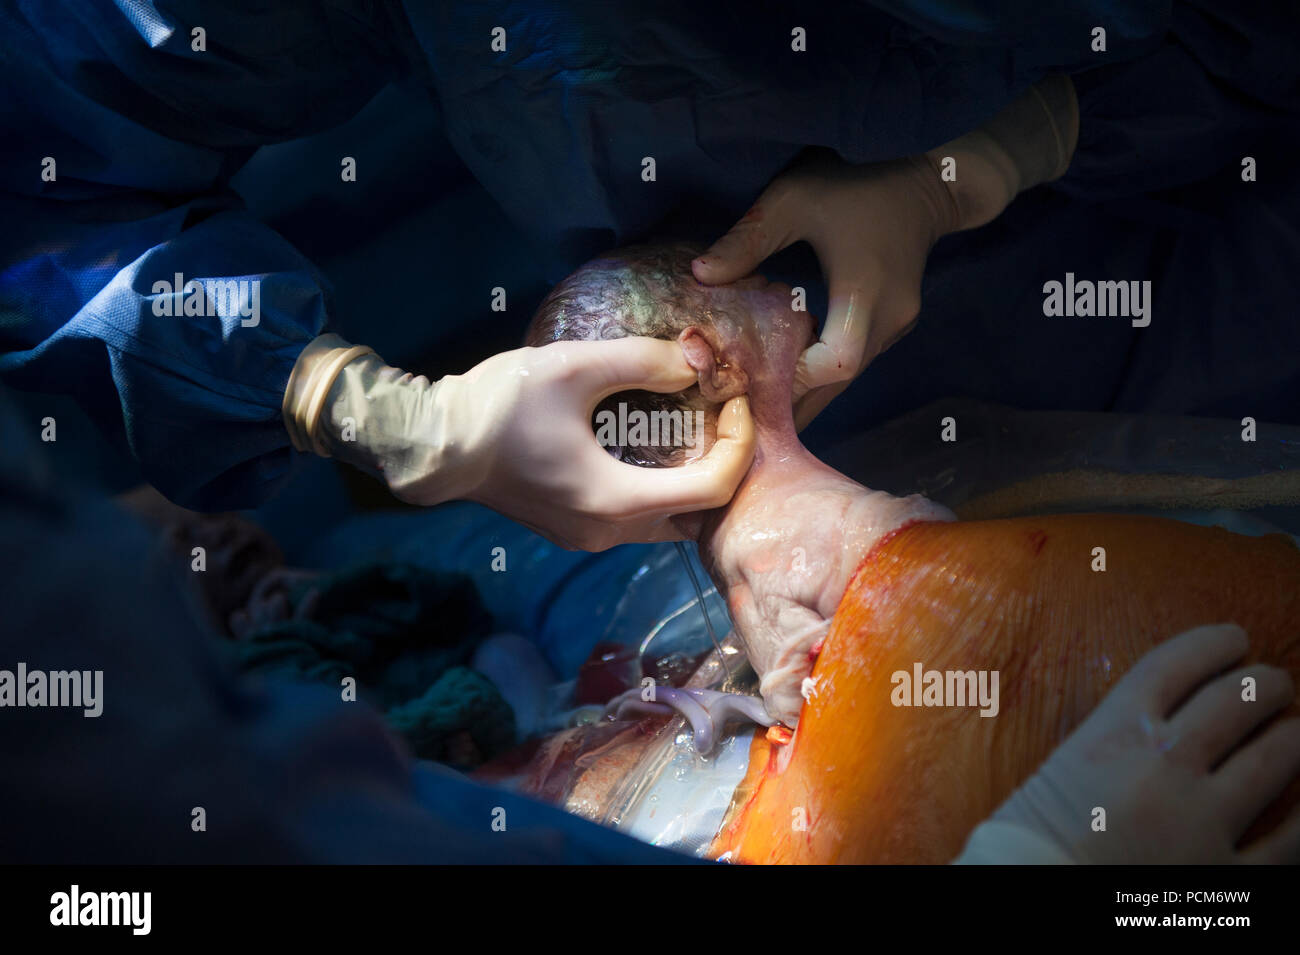 A woman giving birth to twins by caesarean section (Heverlee, 30/12/2016) Stock Photo